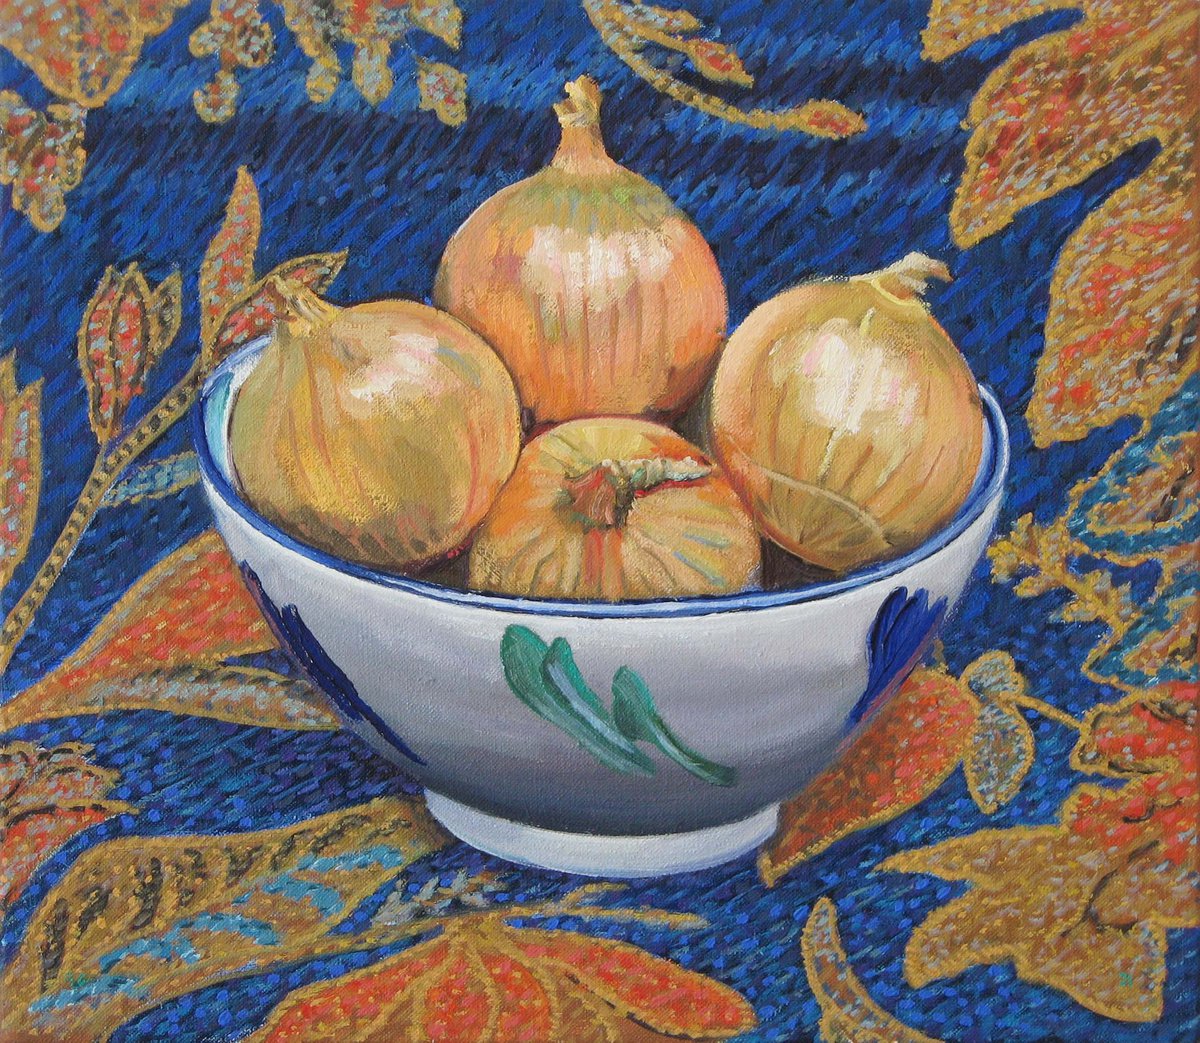 Onions in a Bowl by Richard Gibson